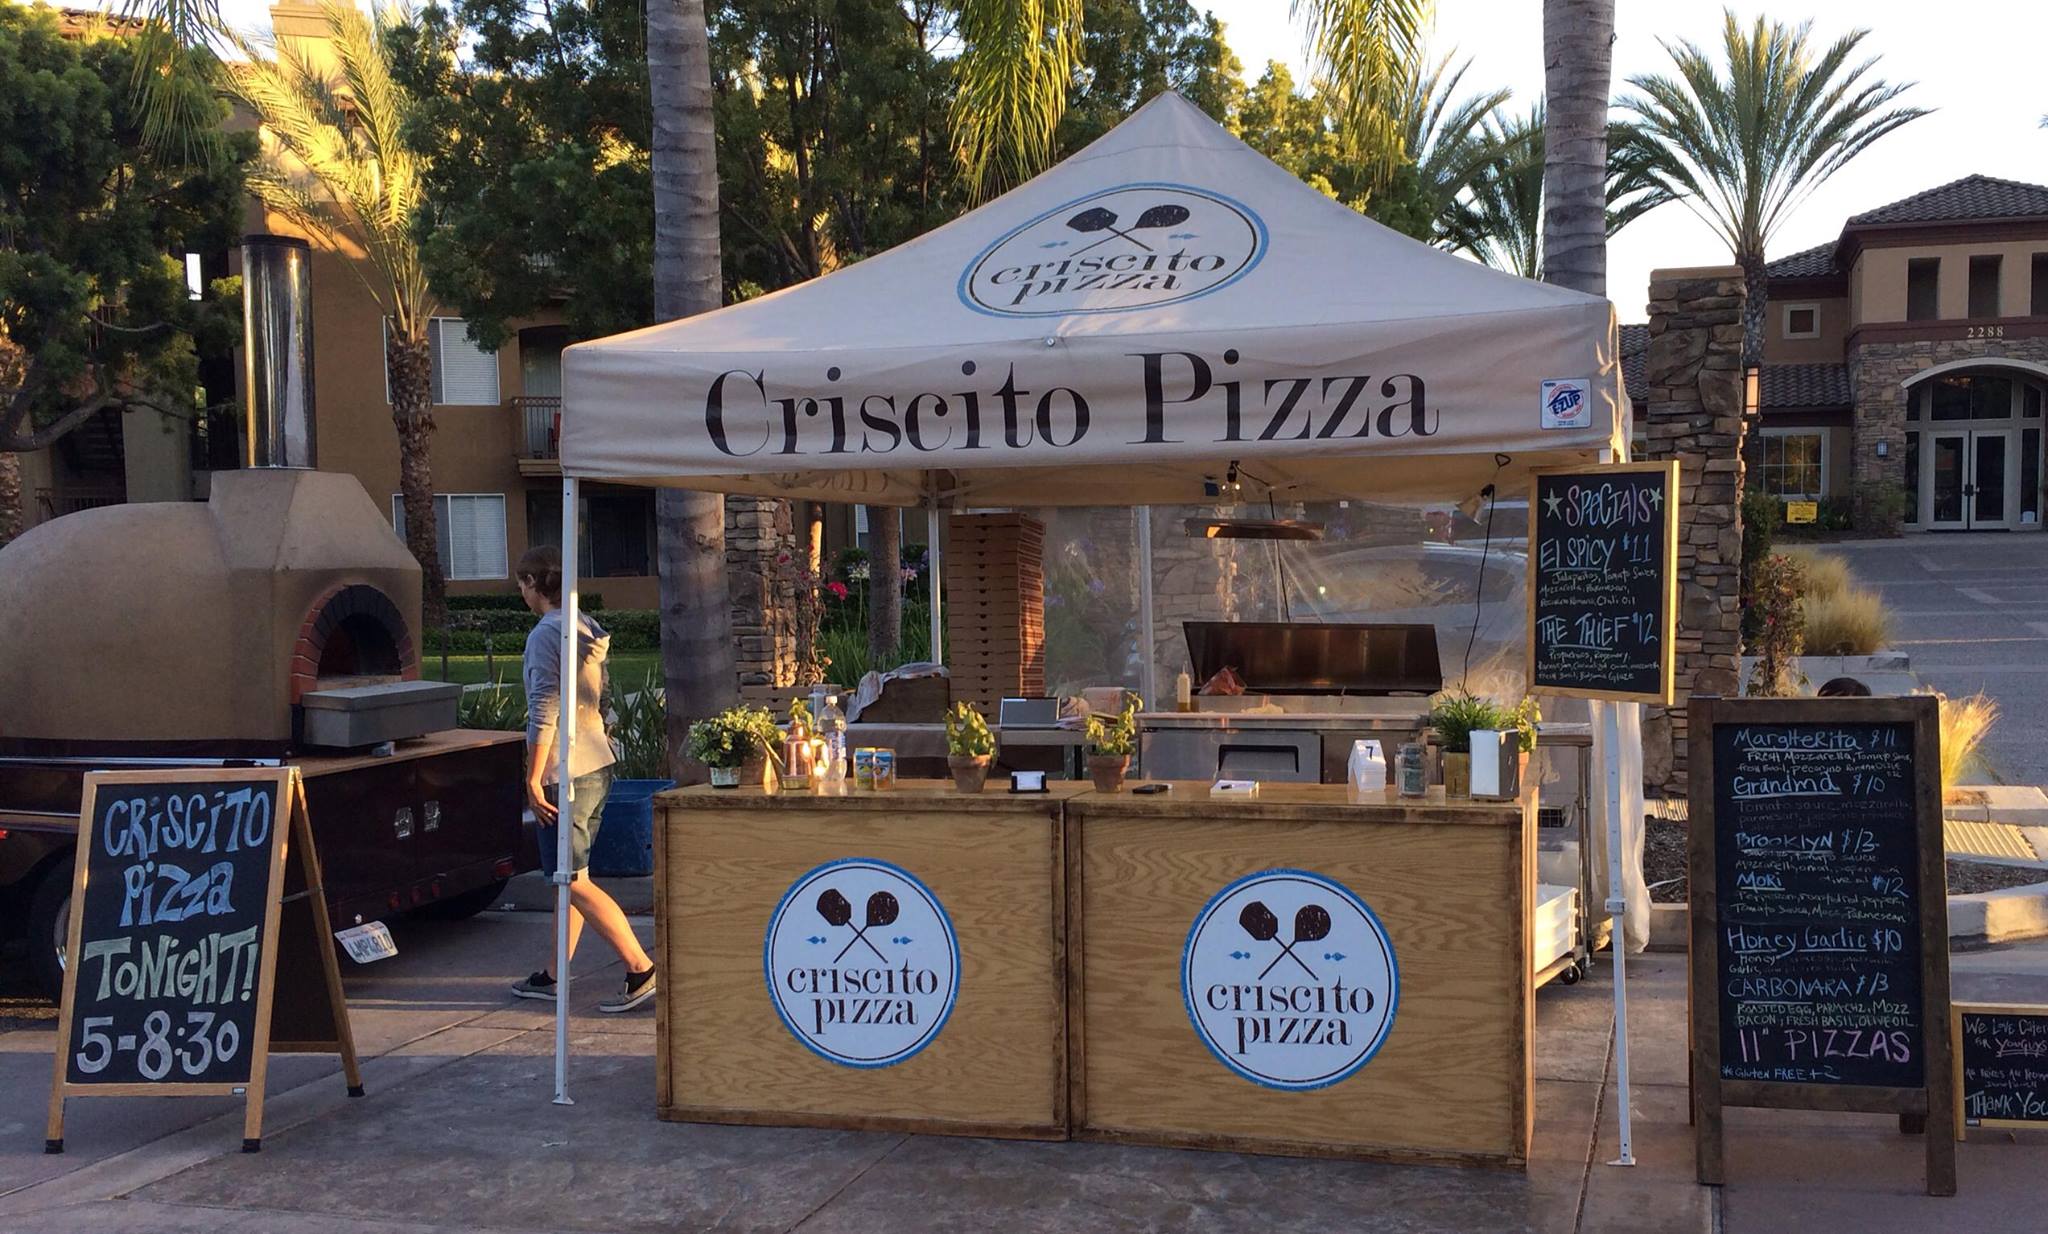 Criscito Pizza Catering set up